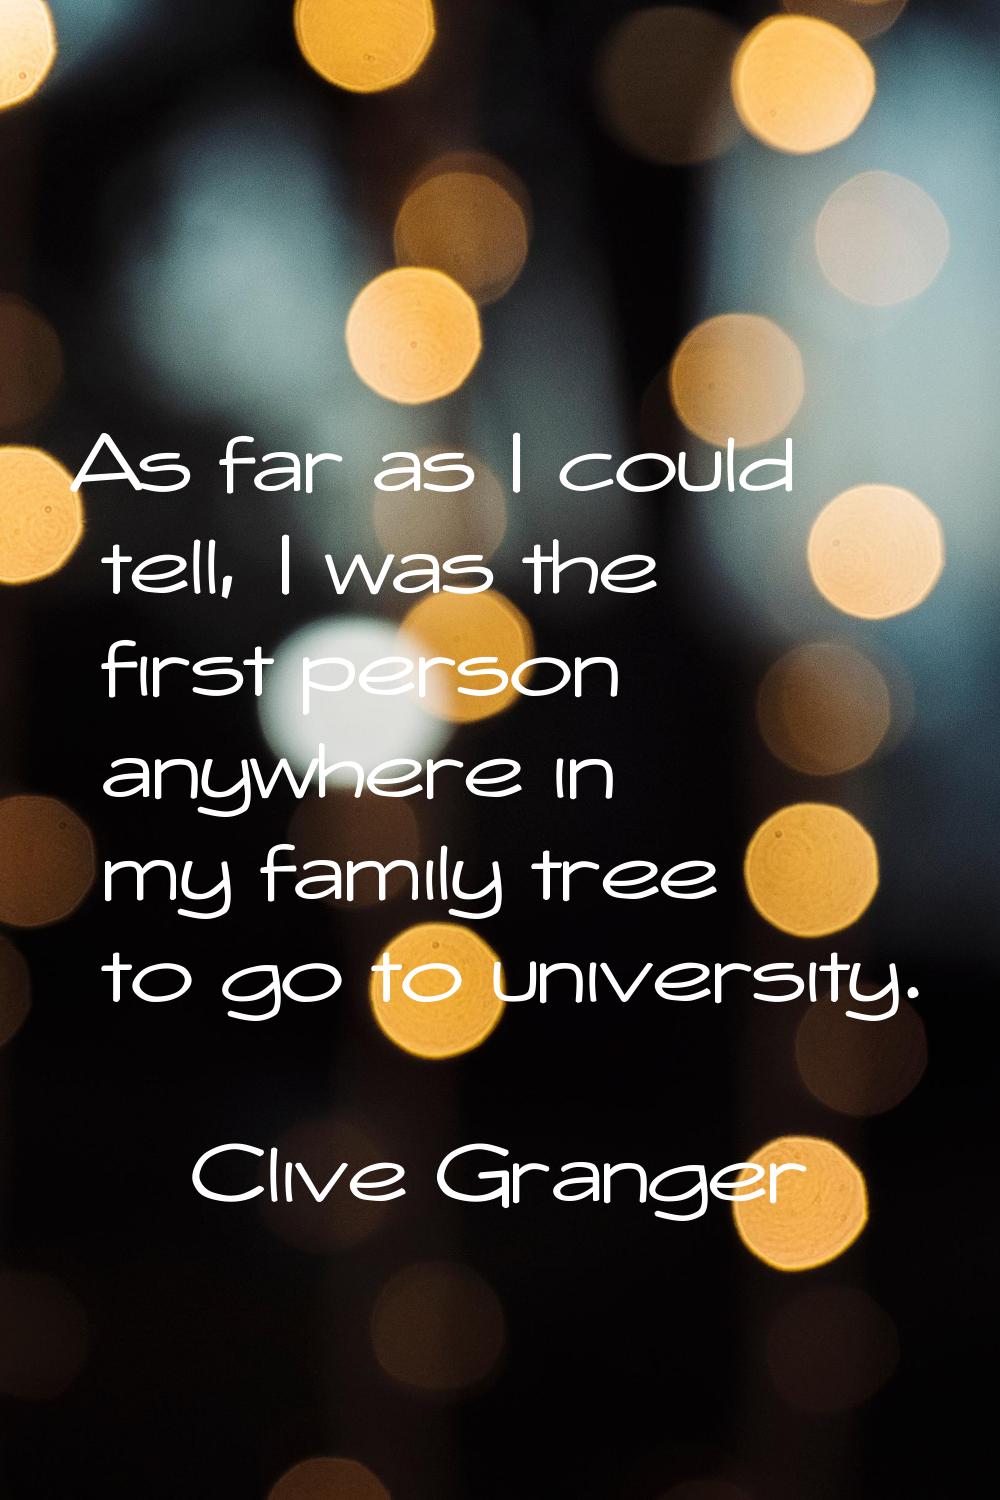 As far as I could tell, I was the first person anywhere in my family tree to go to university.